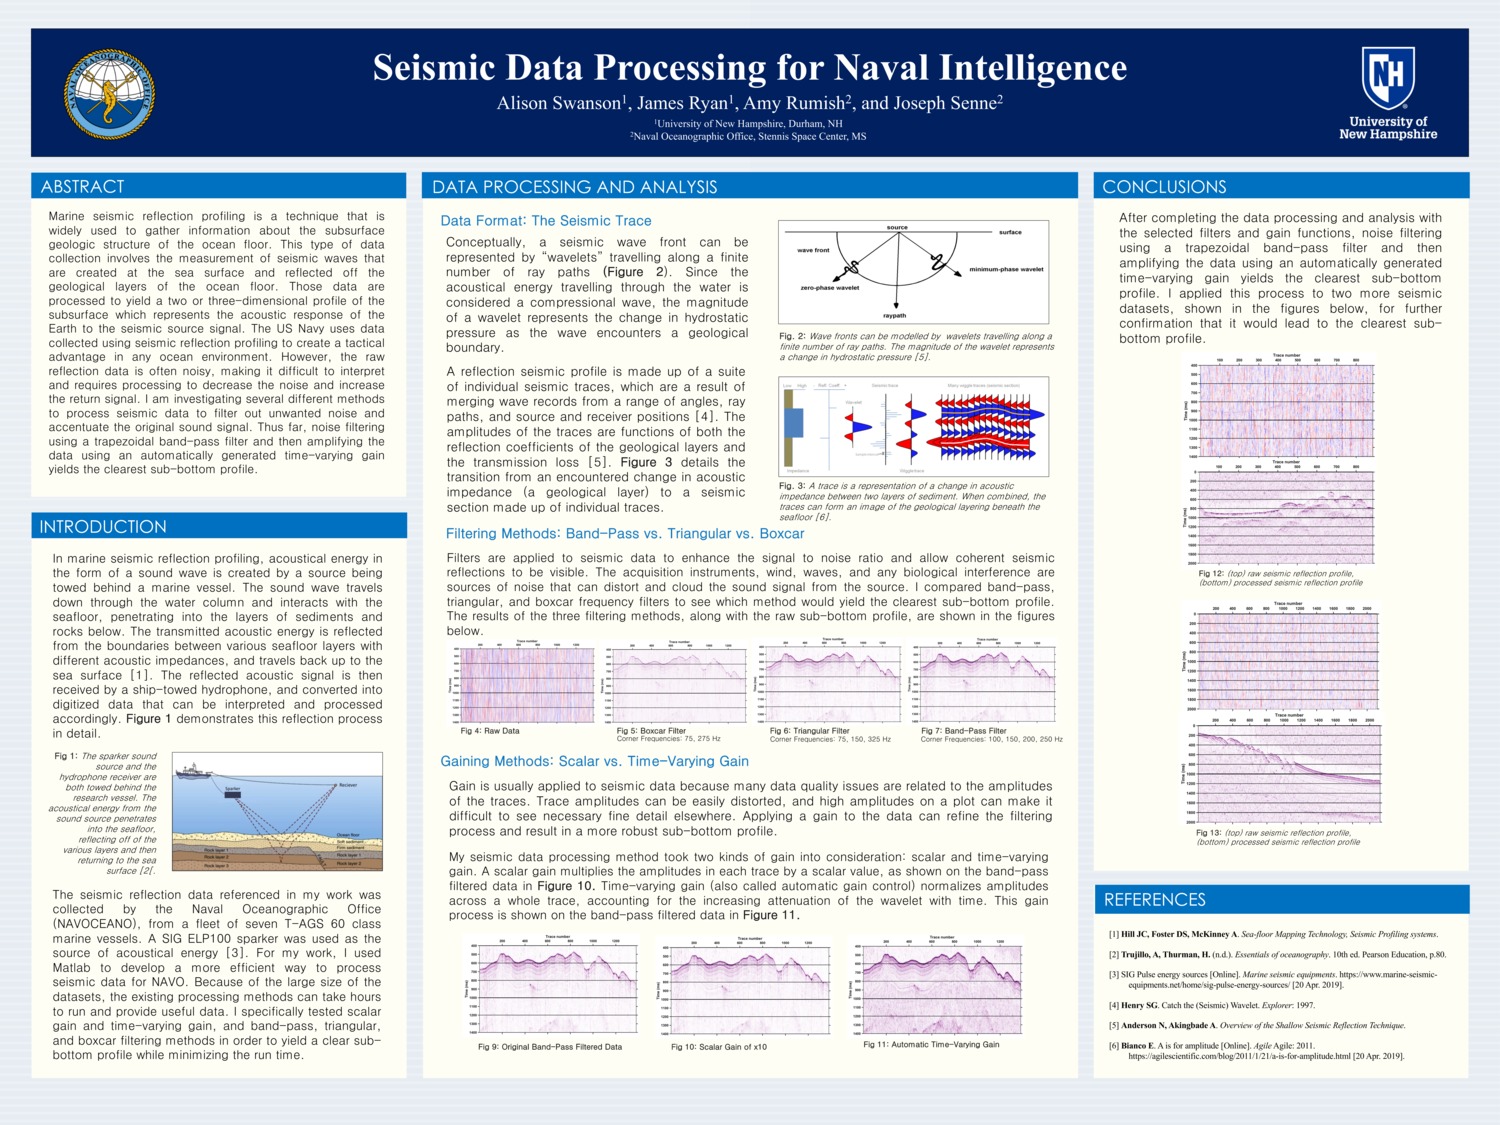 Seismic Data Processing For Naval Intelligence by als1024